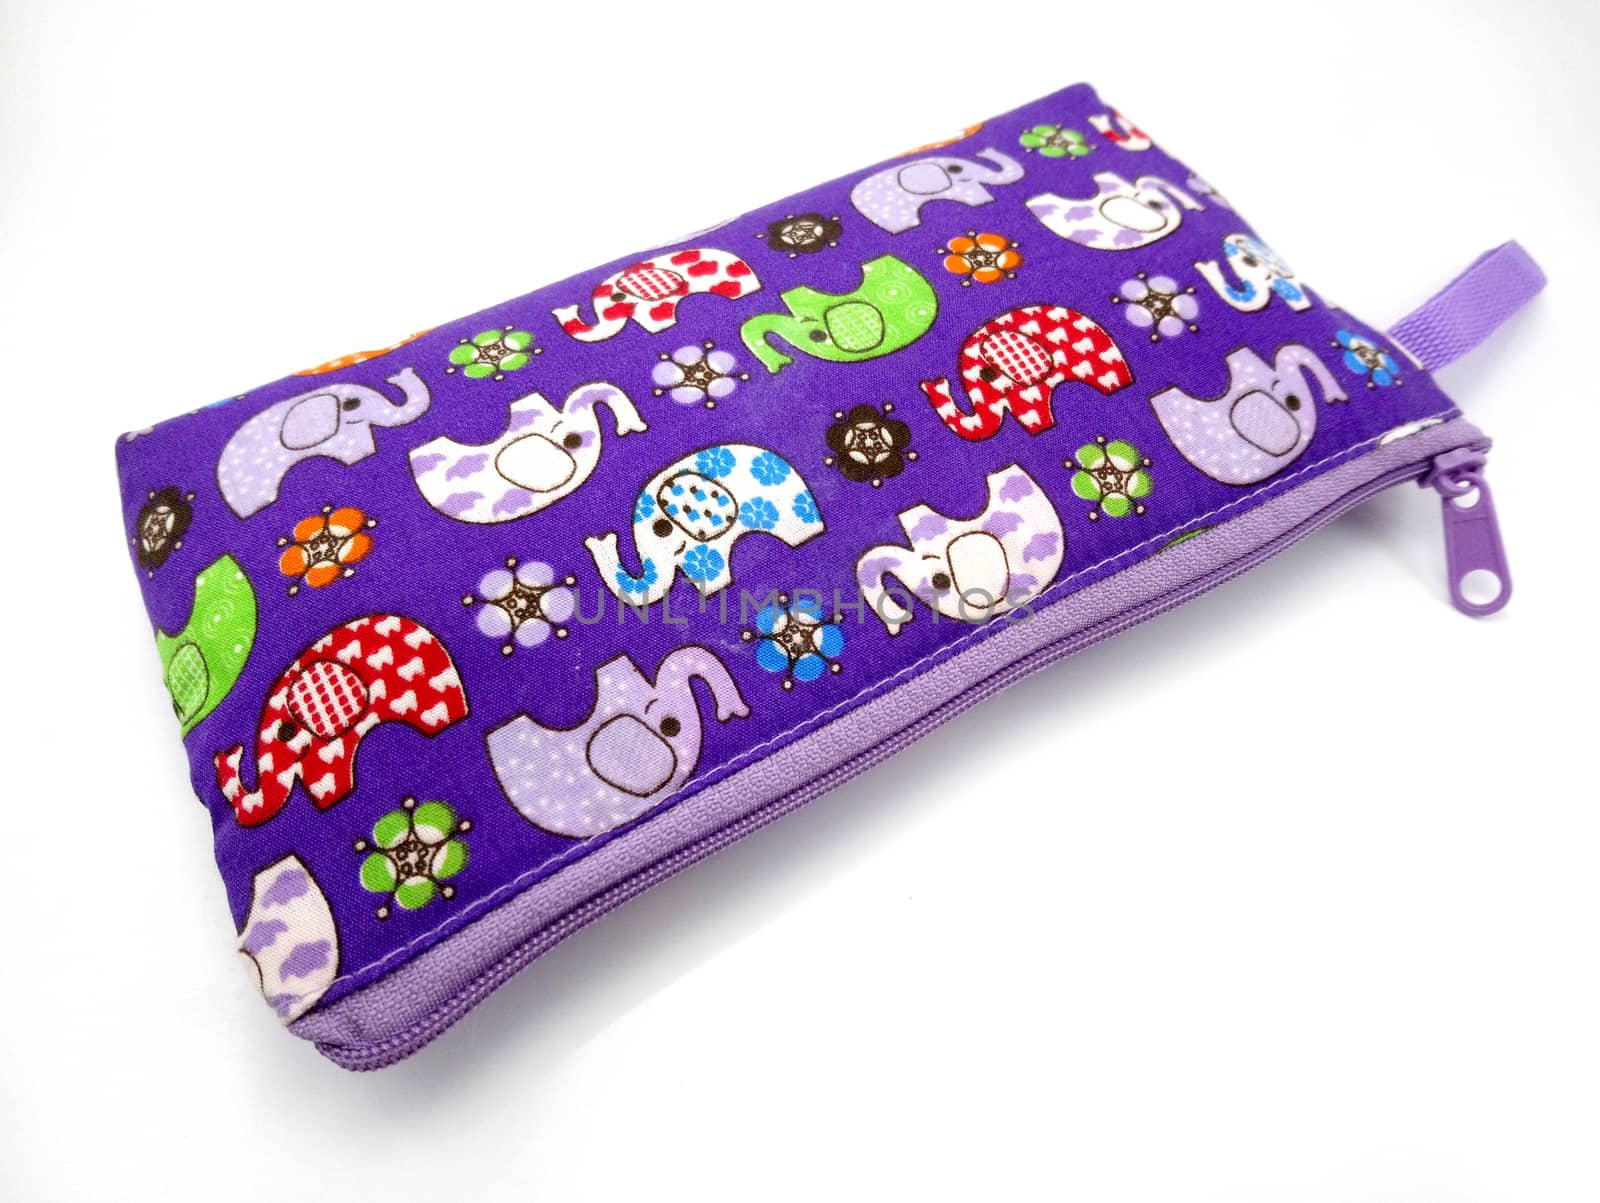 MANILA, PH - JUNE 23 - Elephant pouch purple case at Thailand on June 23, 2020 in Manila, Philippines.